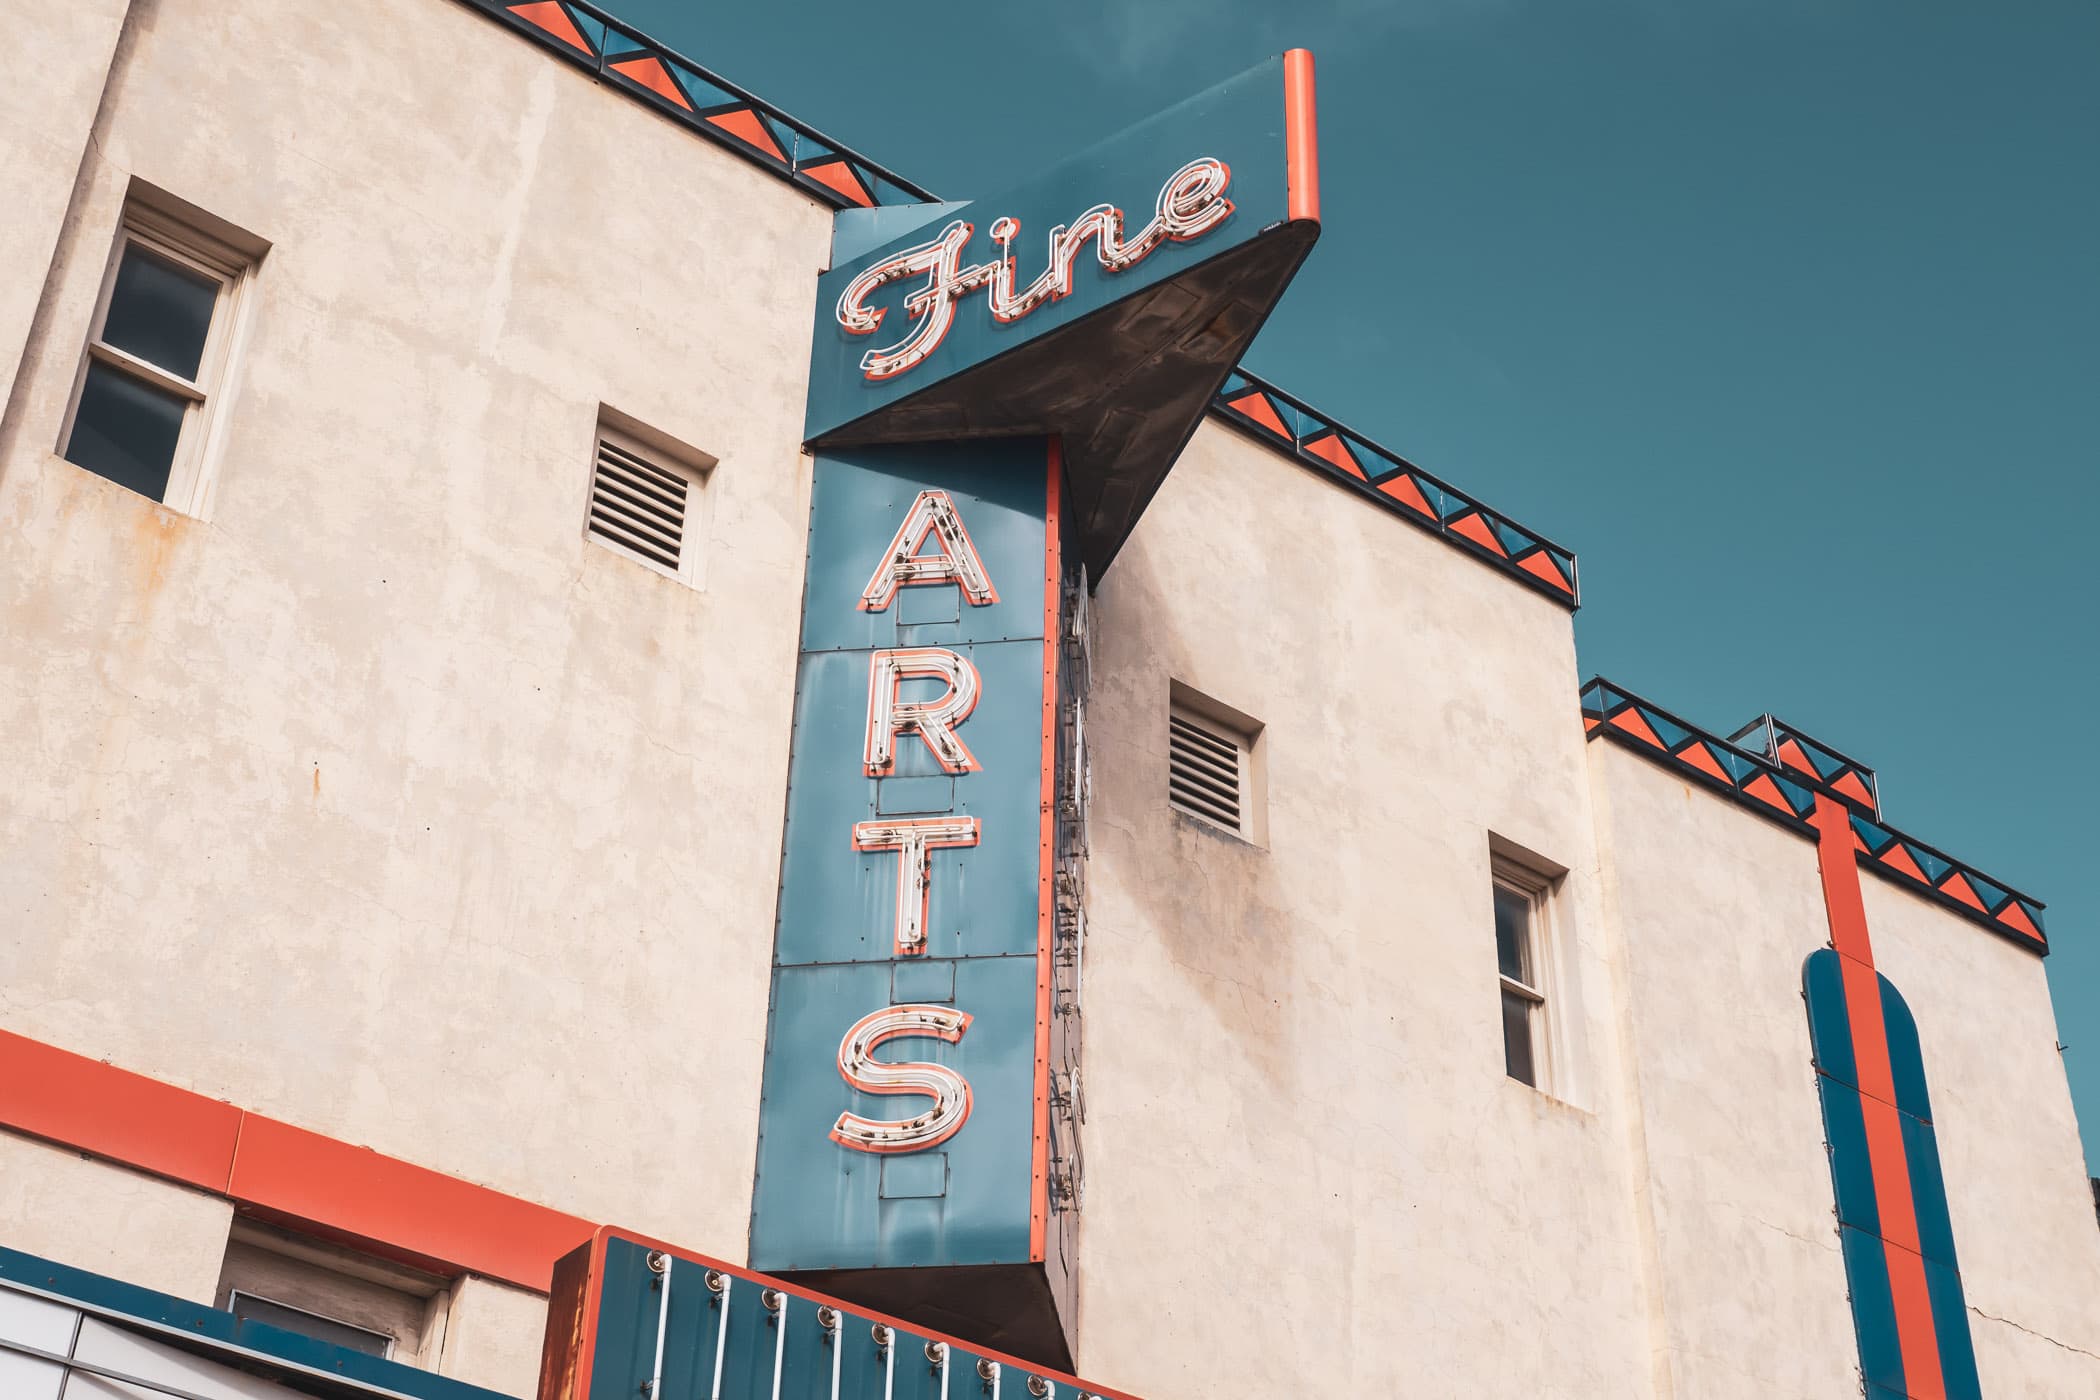 Architectural detail of the Fine Arts Theatre in Downtown Denton, Texas.